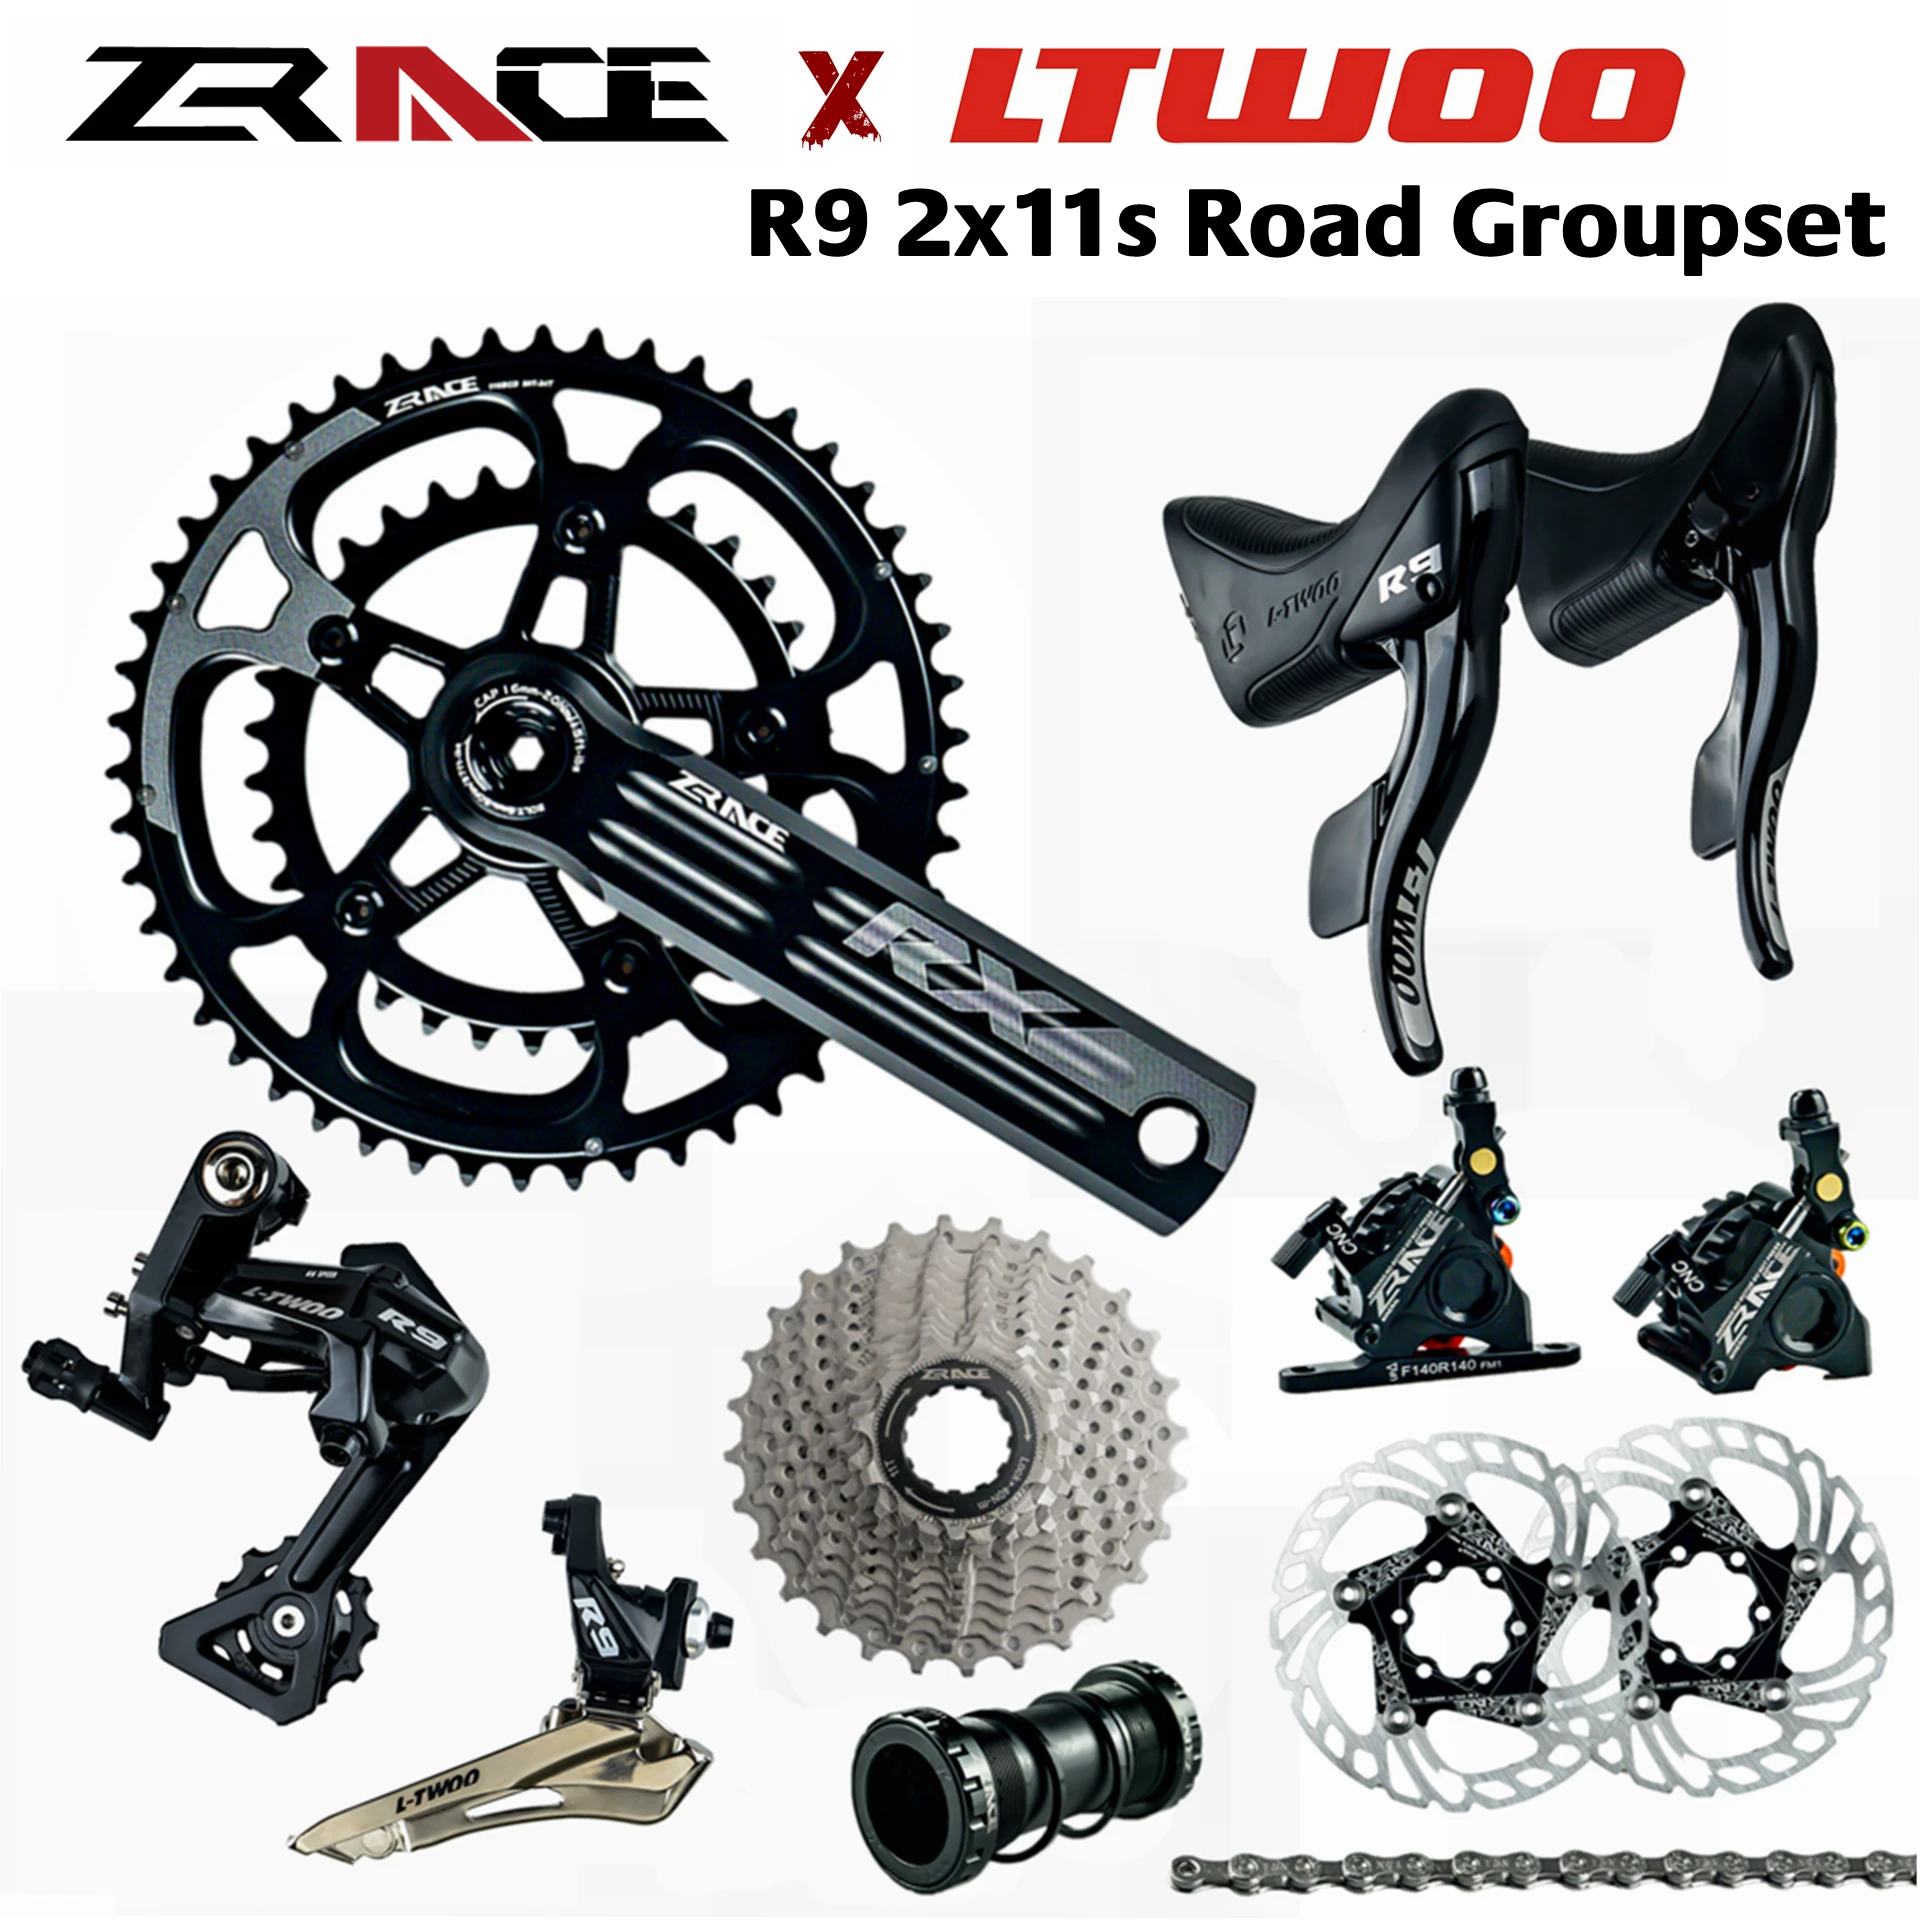 

LTWOO R9 + ZRACE Crank Hydraulic Disc Brake Cassette Chain 2x11 Speed, 22s Road Groupset, for Road bike Bicycle 5800, R7000